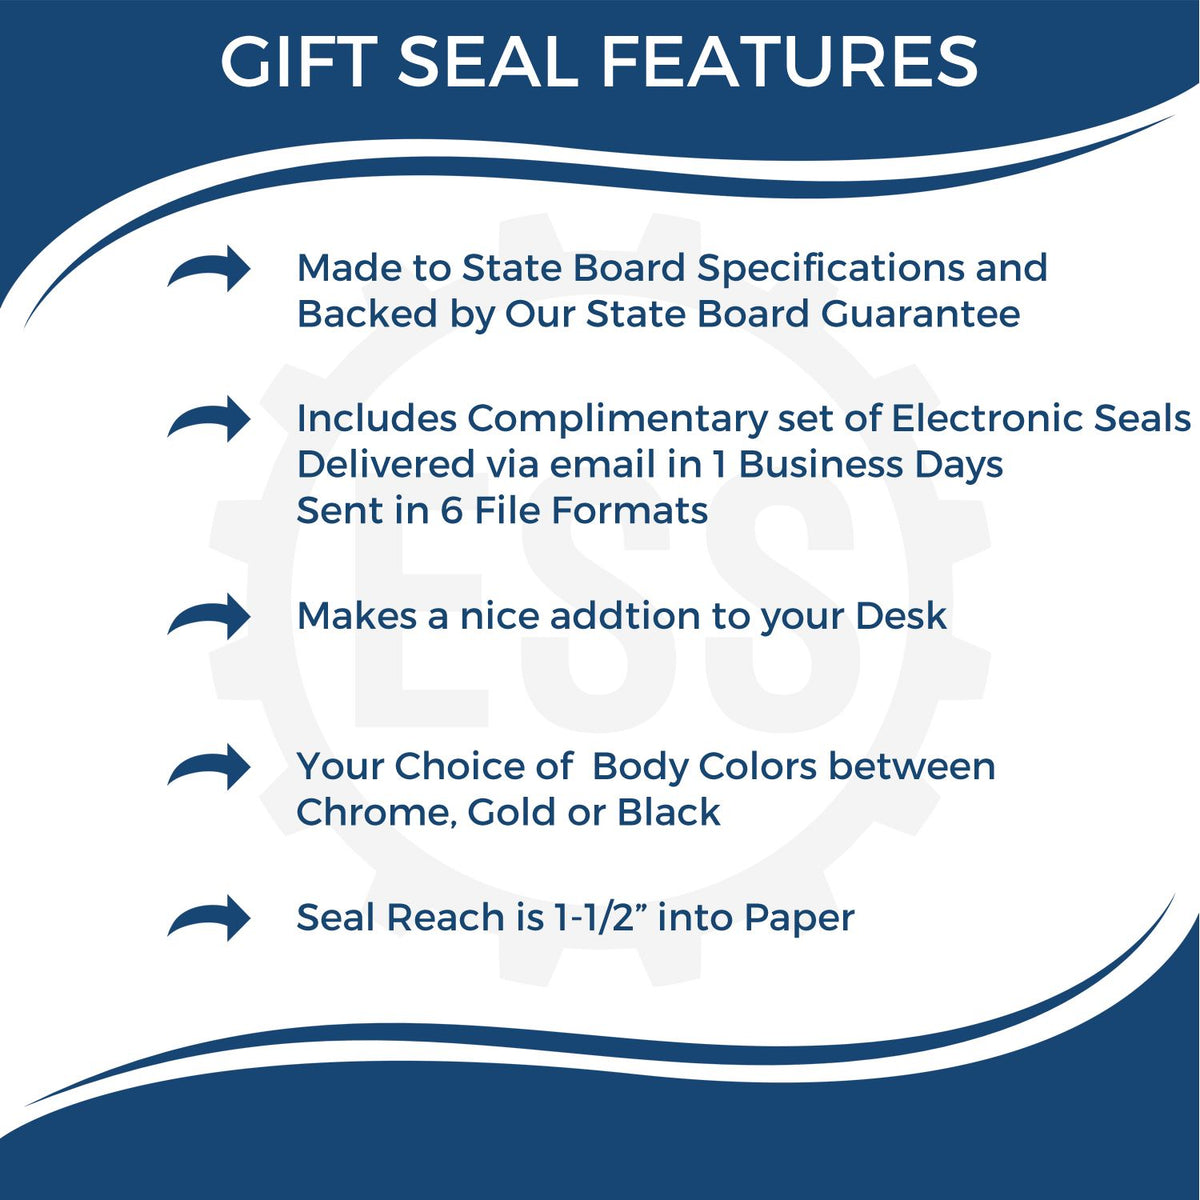 A picture of an infographic highlighting the selling points for the Gift Delaware Architect Seal